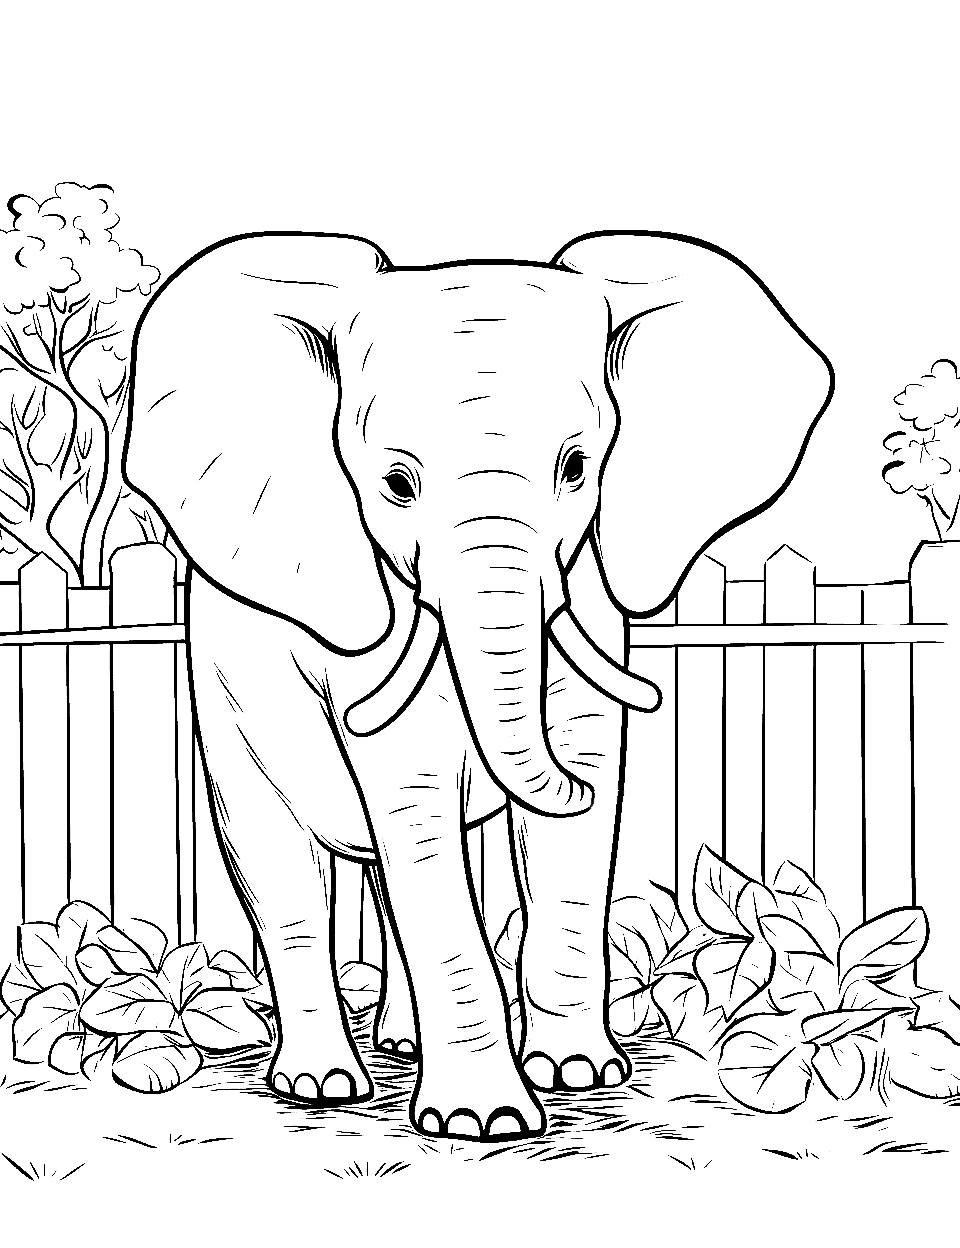 Day of an Elephant Coloring Page - An elephant with a simple background setting.